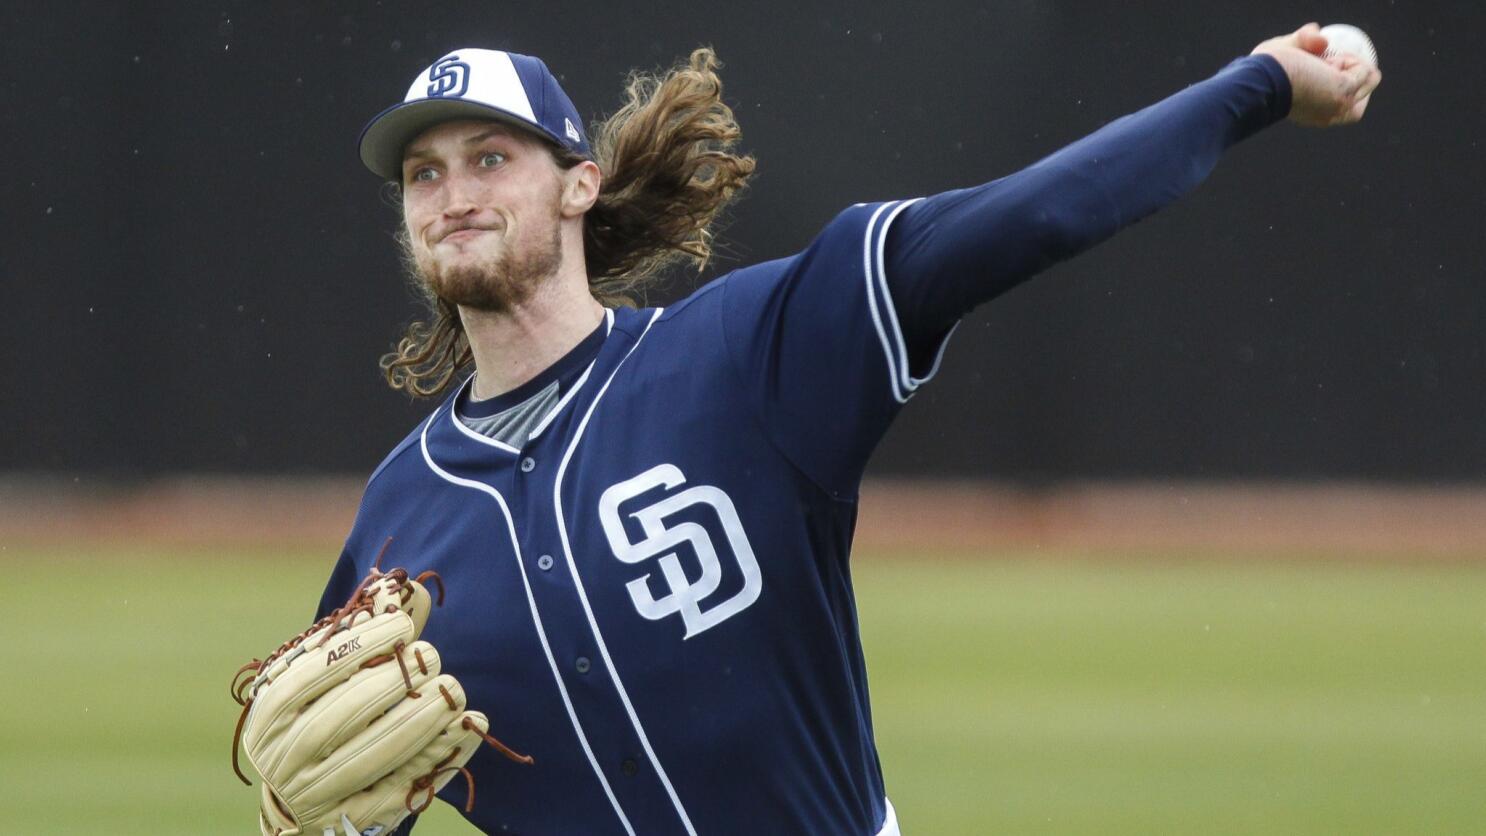 Matt Strahm could add weight to Padres' rotation - The San Diego